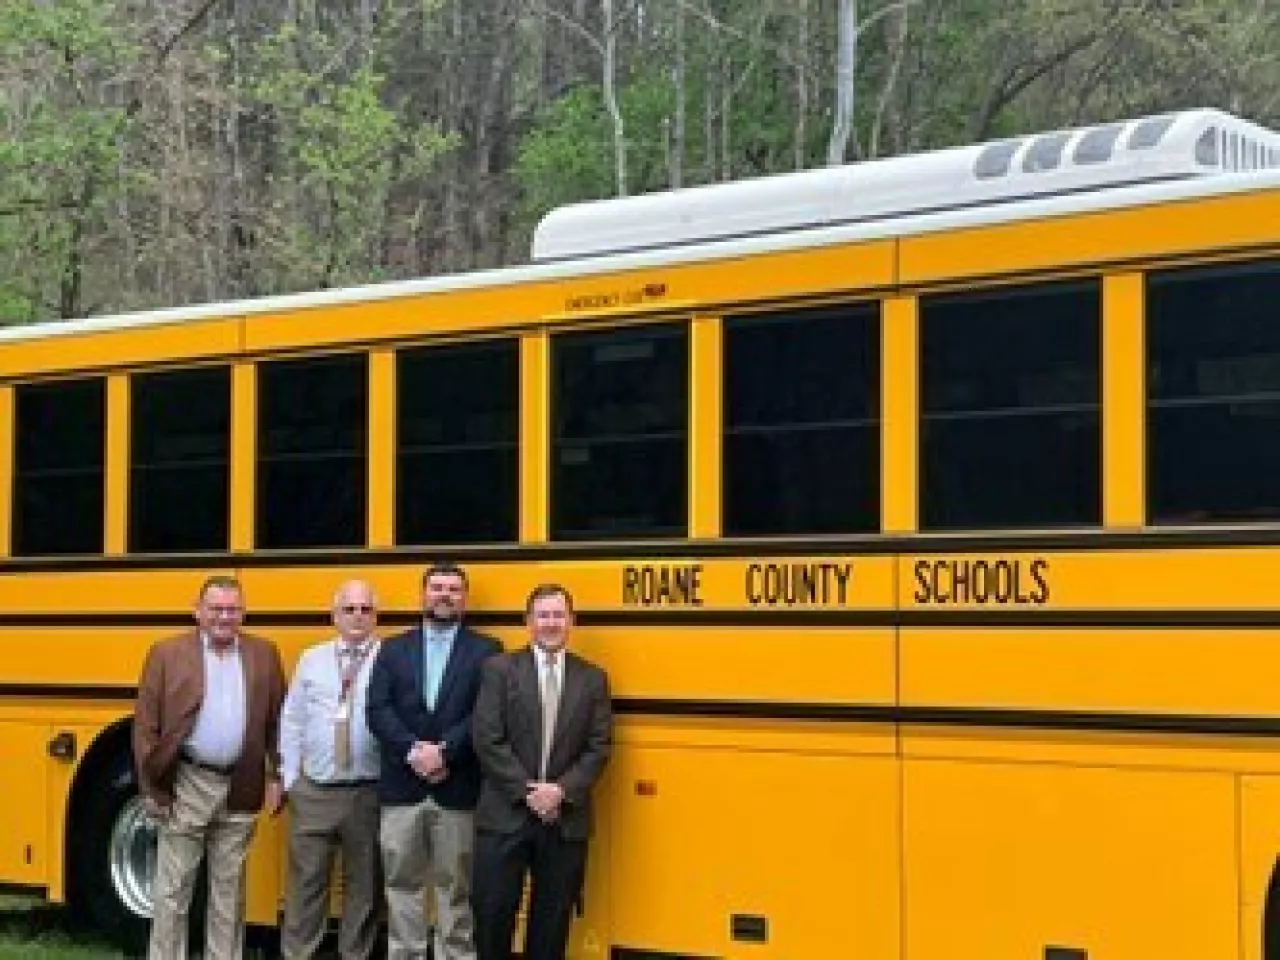 Roane County Schools taking delivery of a GreenPower BEAST all-electric purpose-built school bus. In the photo are GreenPower Motor Vice President Mark Nestlen; Jerry Garner, Director of Operations; Richard Duncan, Superintendent and Jeff Mace, Board of Education President img#3